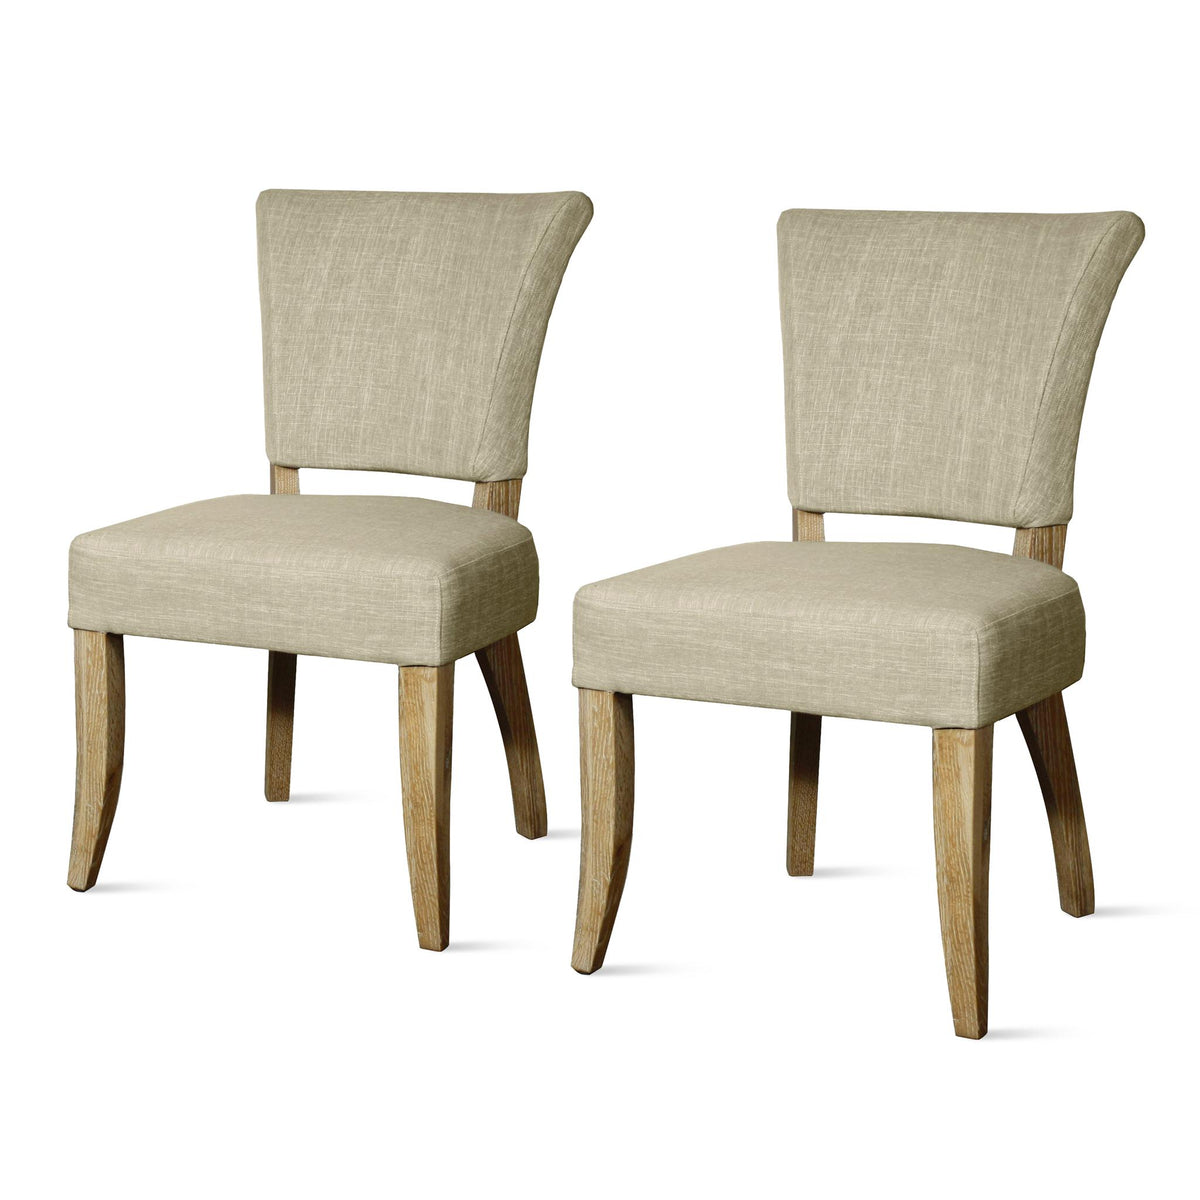 Austin Side Chair (Set of 2) by New Pacific Direct - 398235